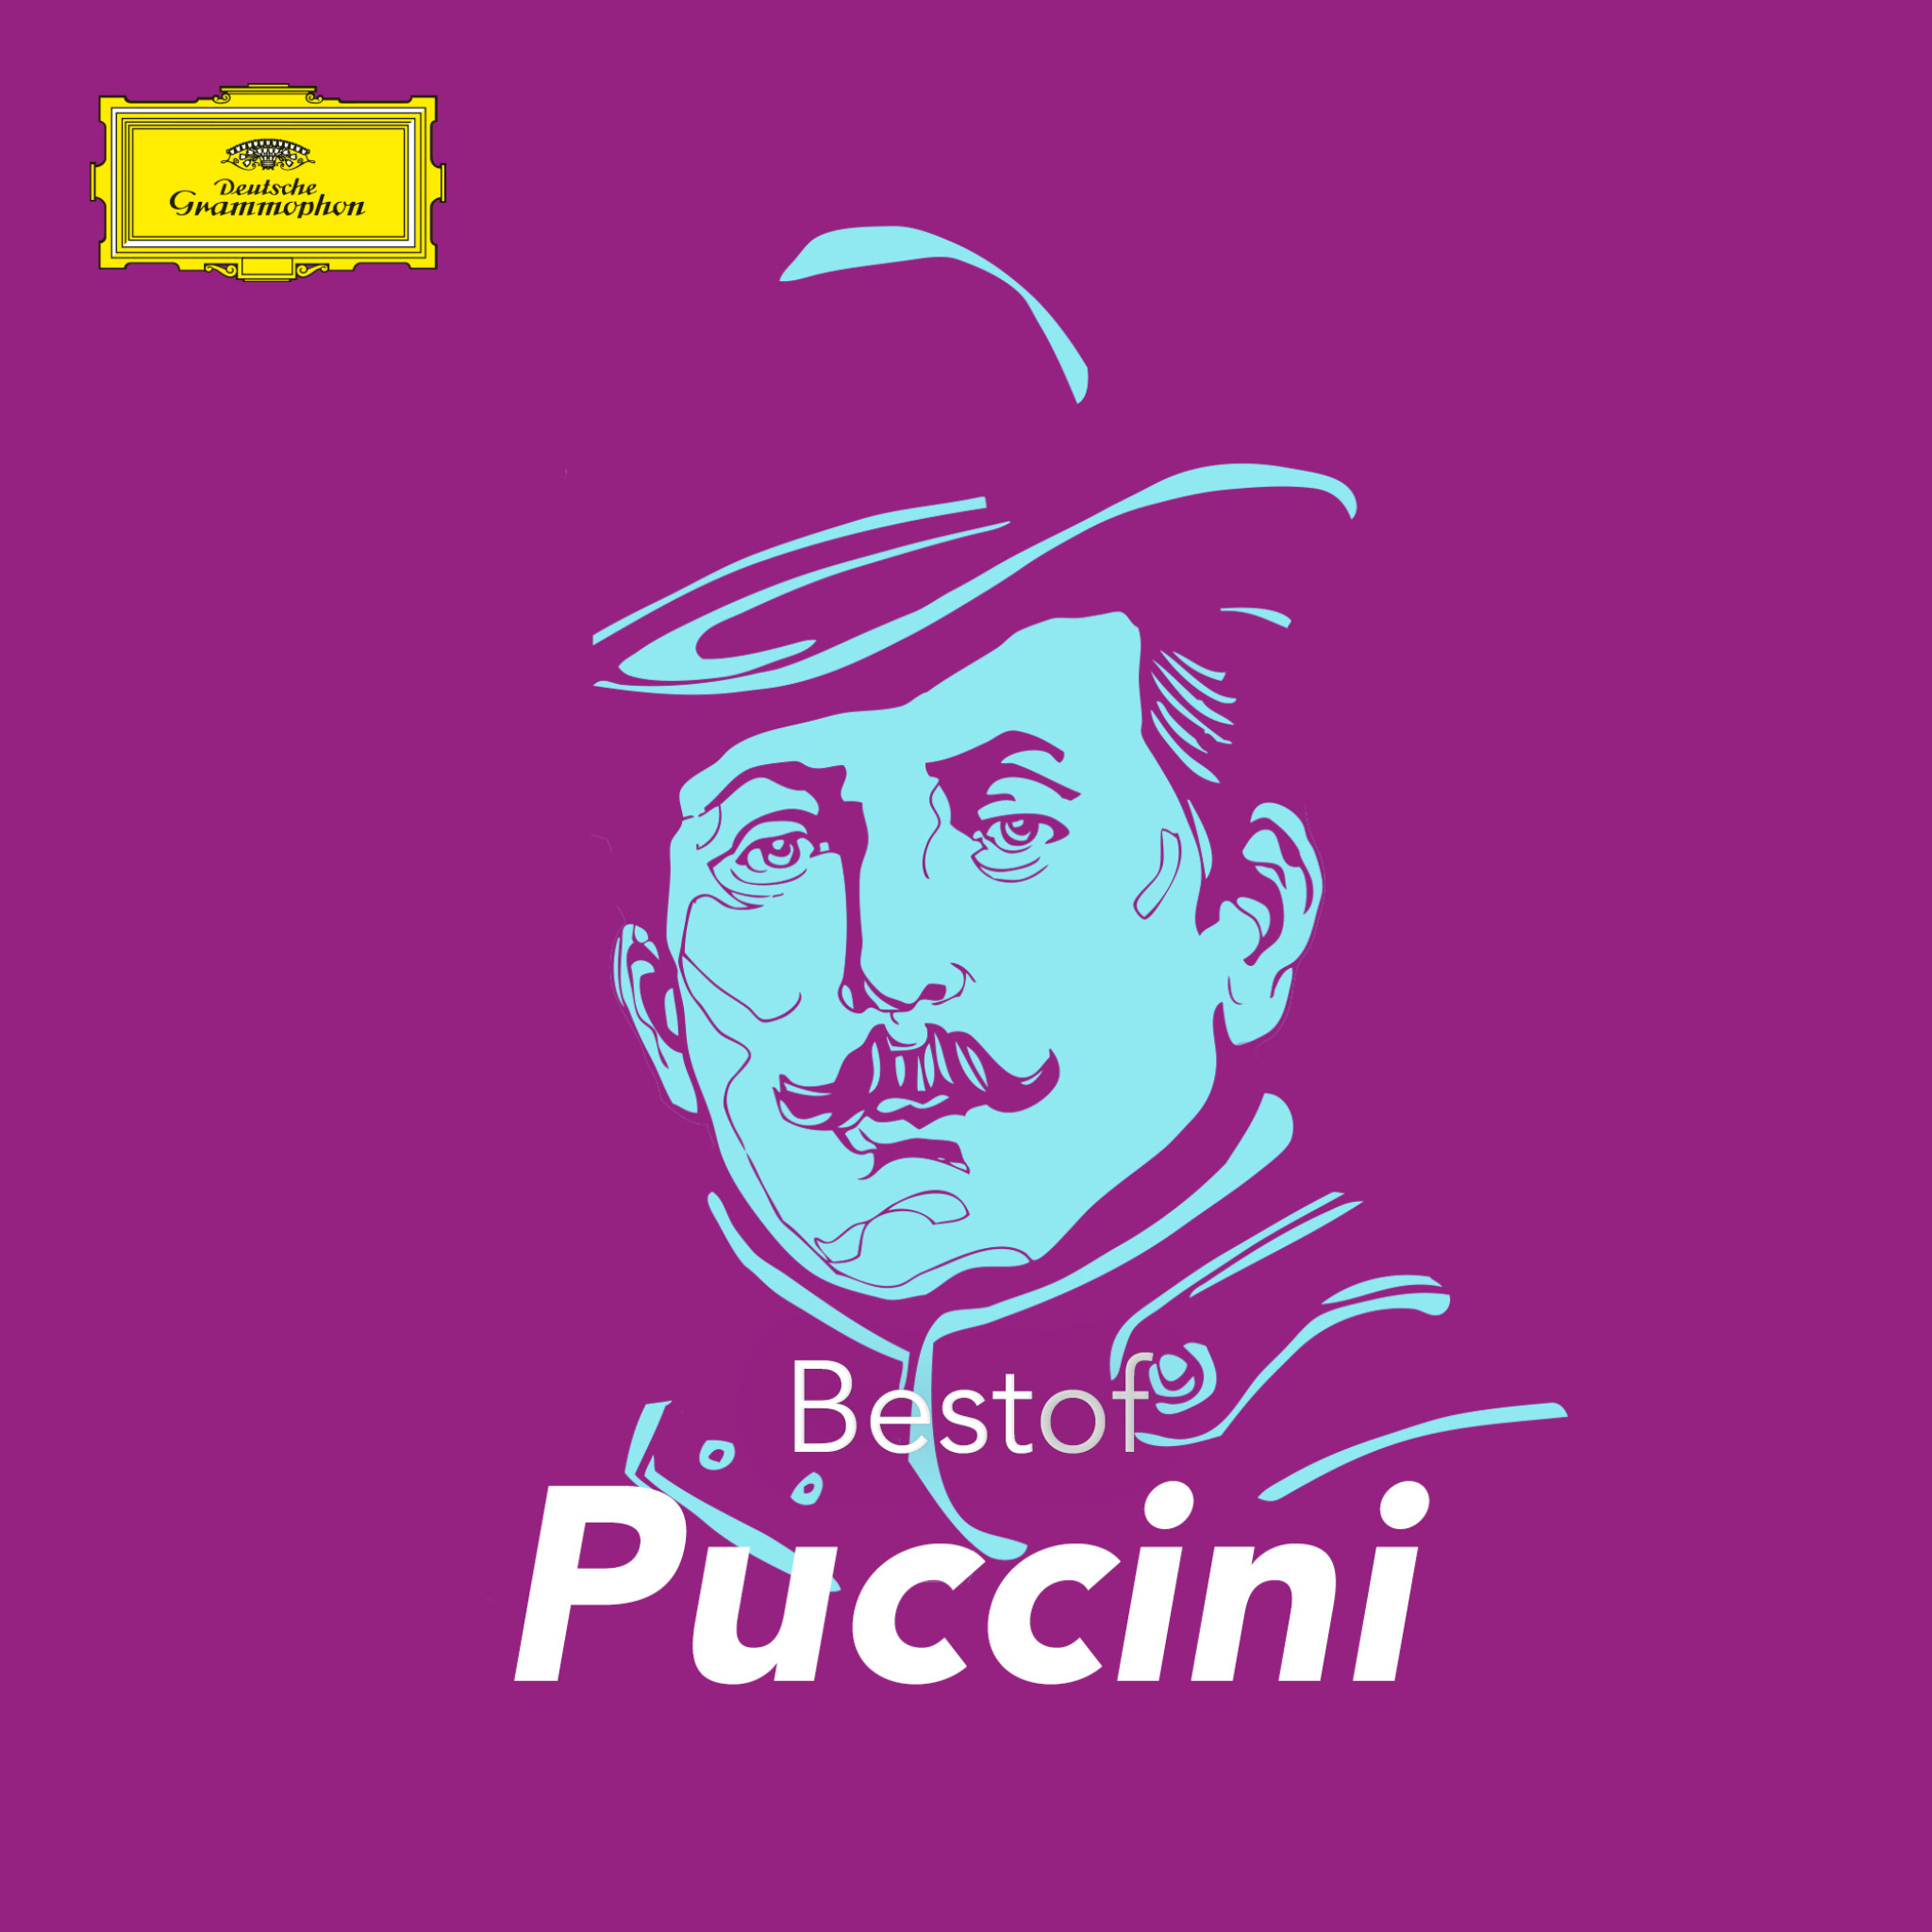 Puccini - Best of